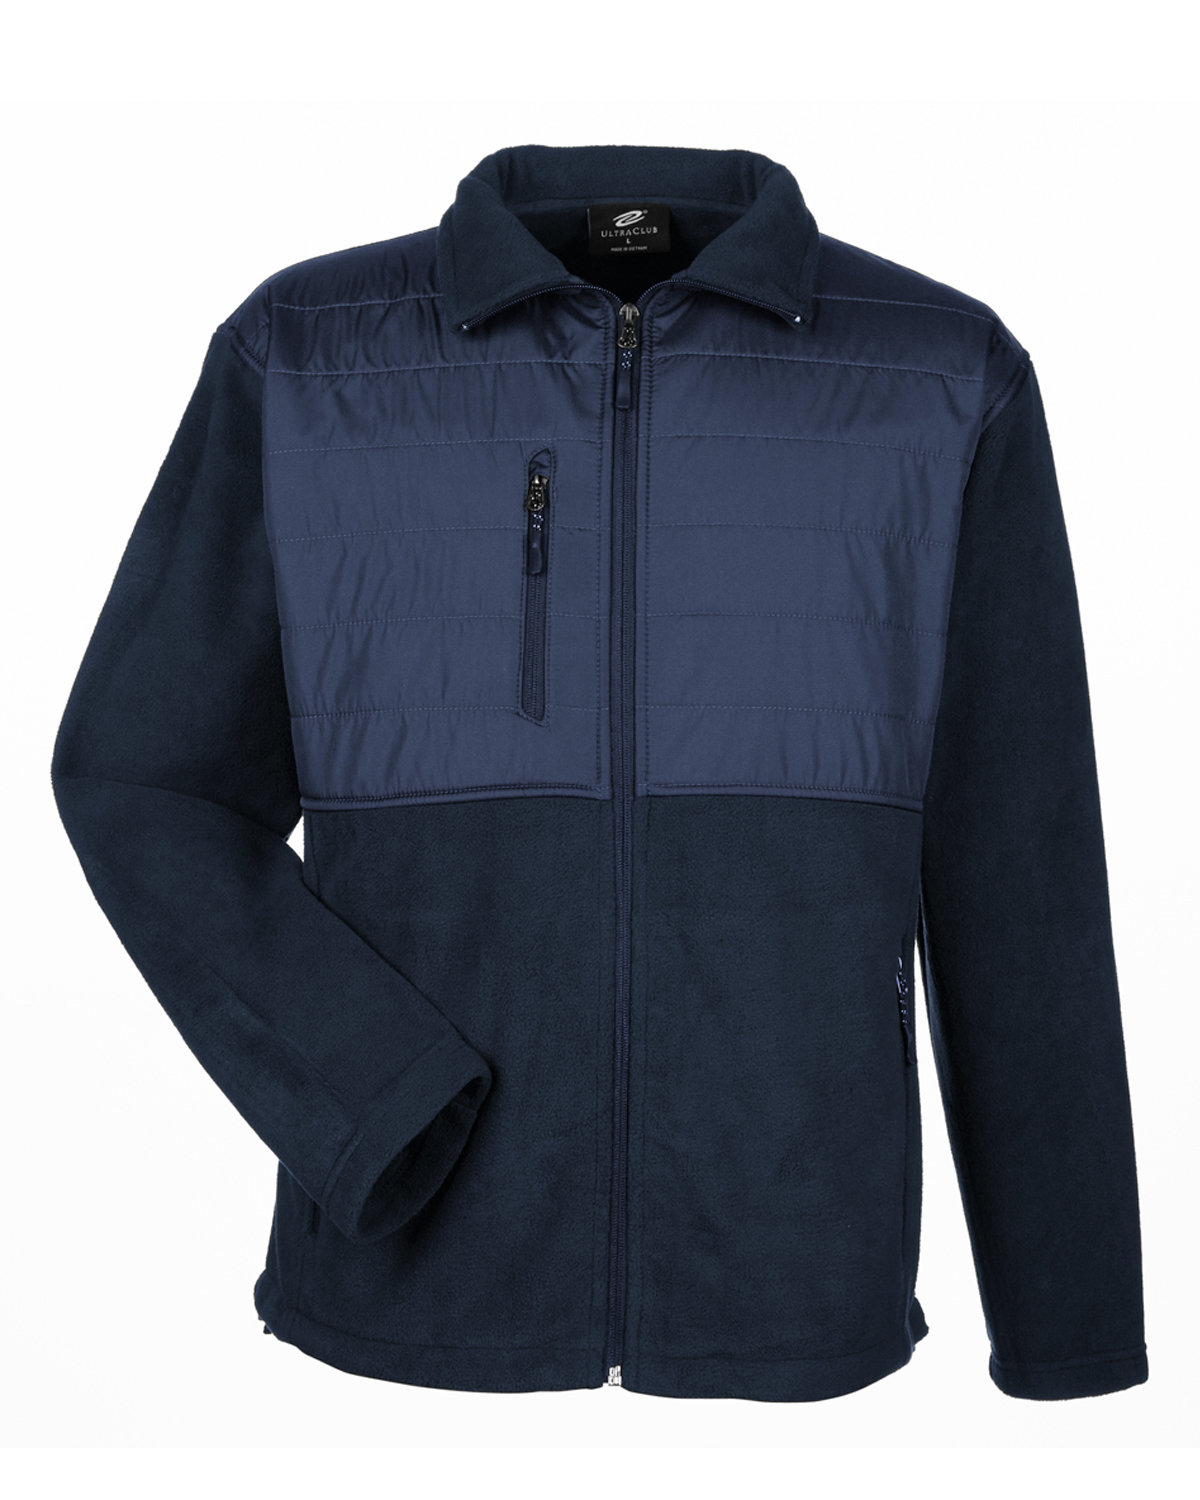 UltraClub Men's Fleece Jacket with Quilted Yoke Overlay | alphabroder